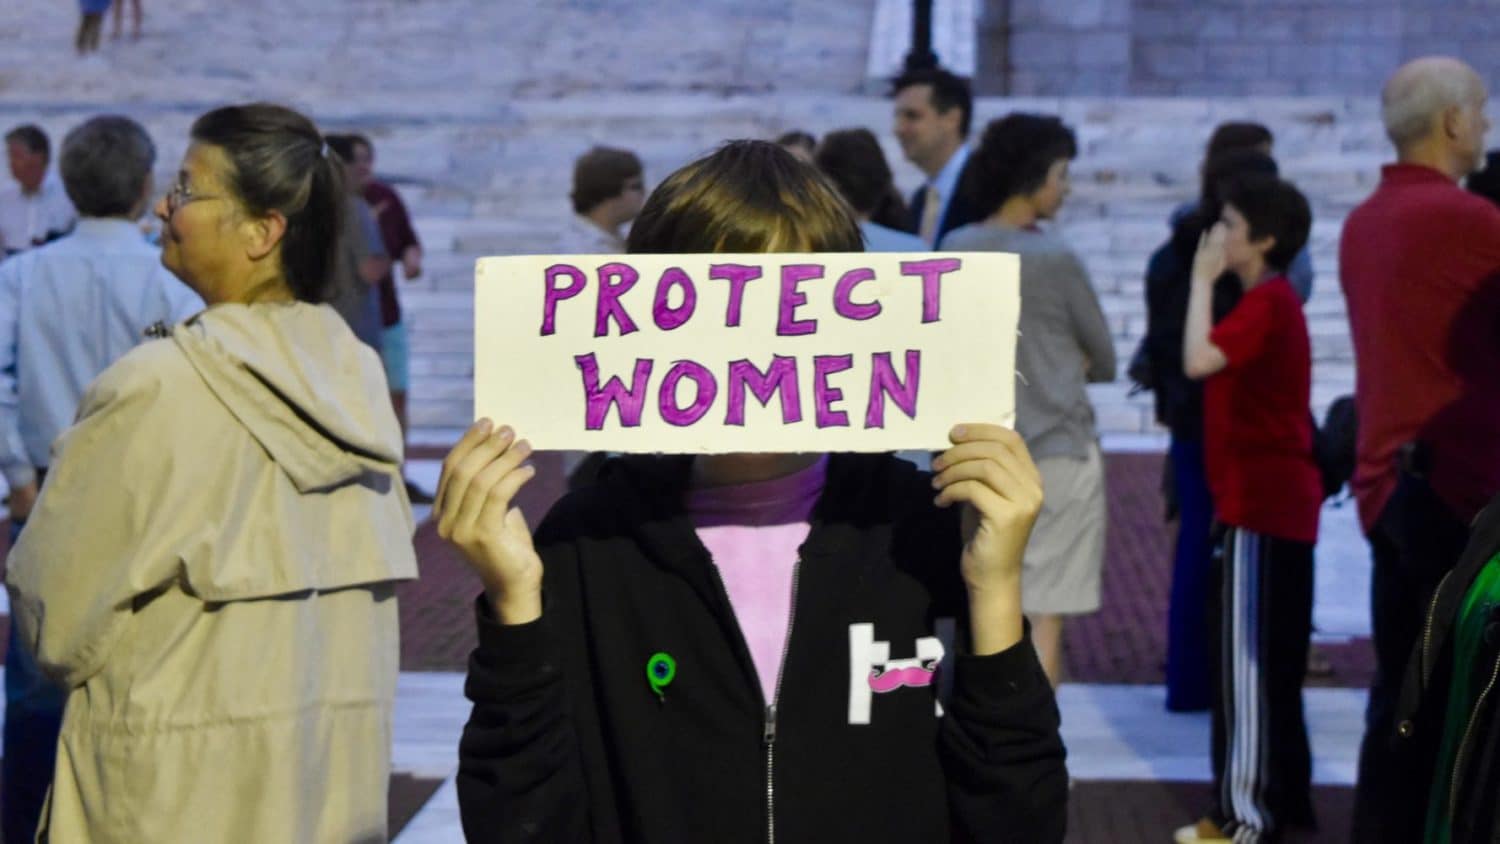 Rhode Island: The Woman Project is working to protect your health care